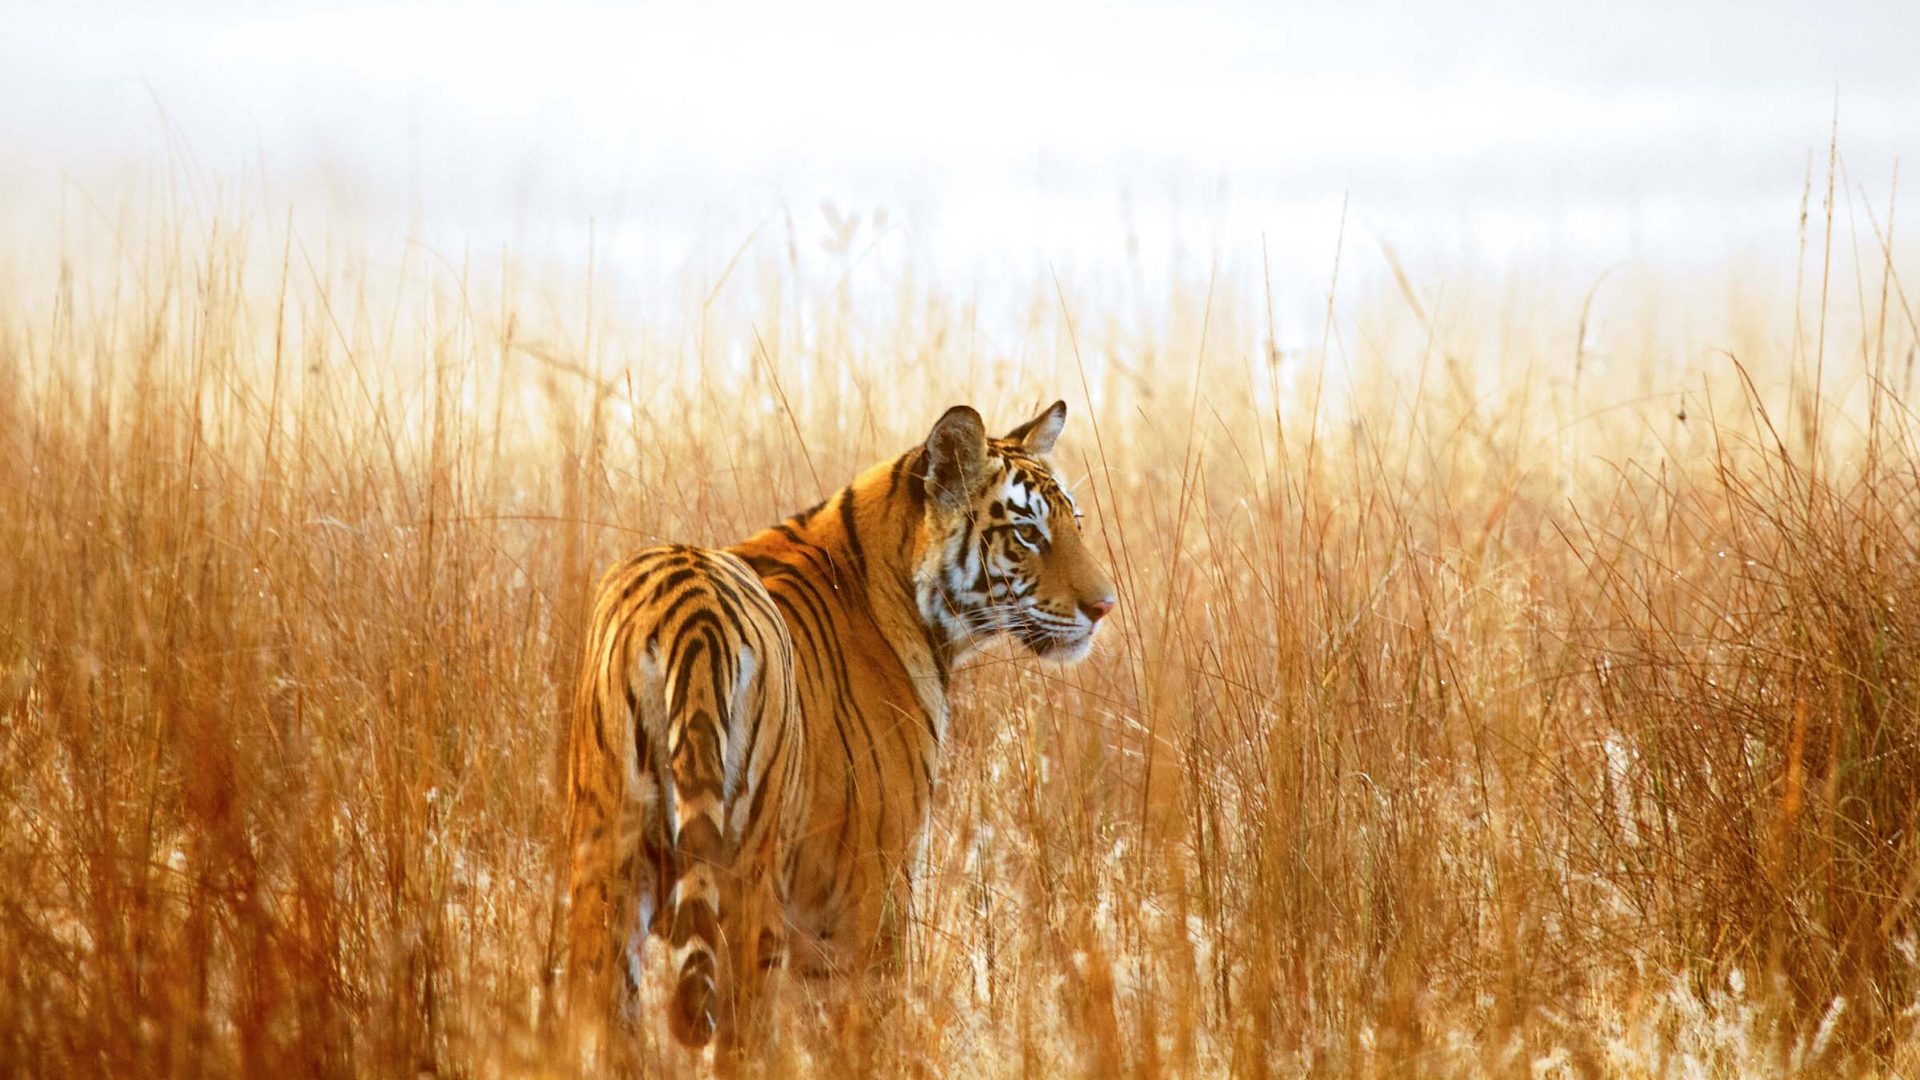 Nepal has doubled its tiger population—but at what price? 